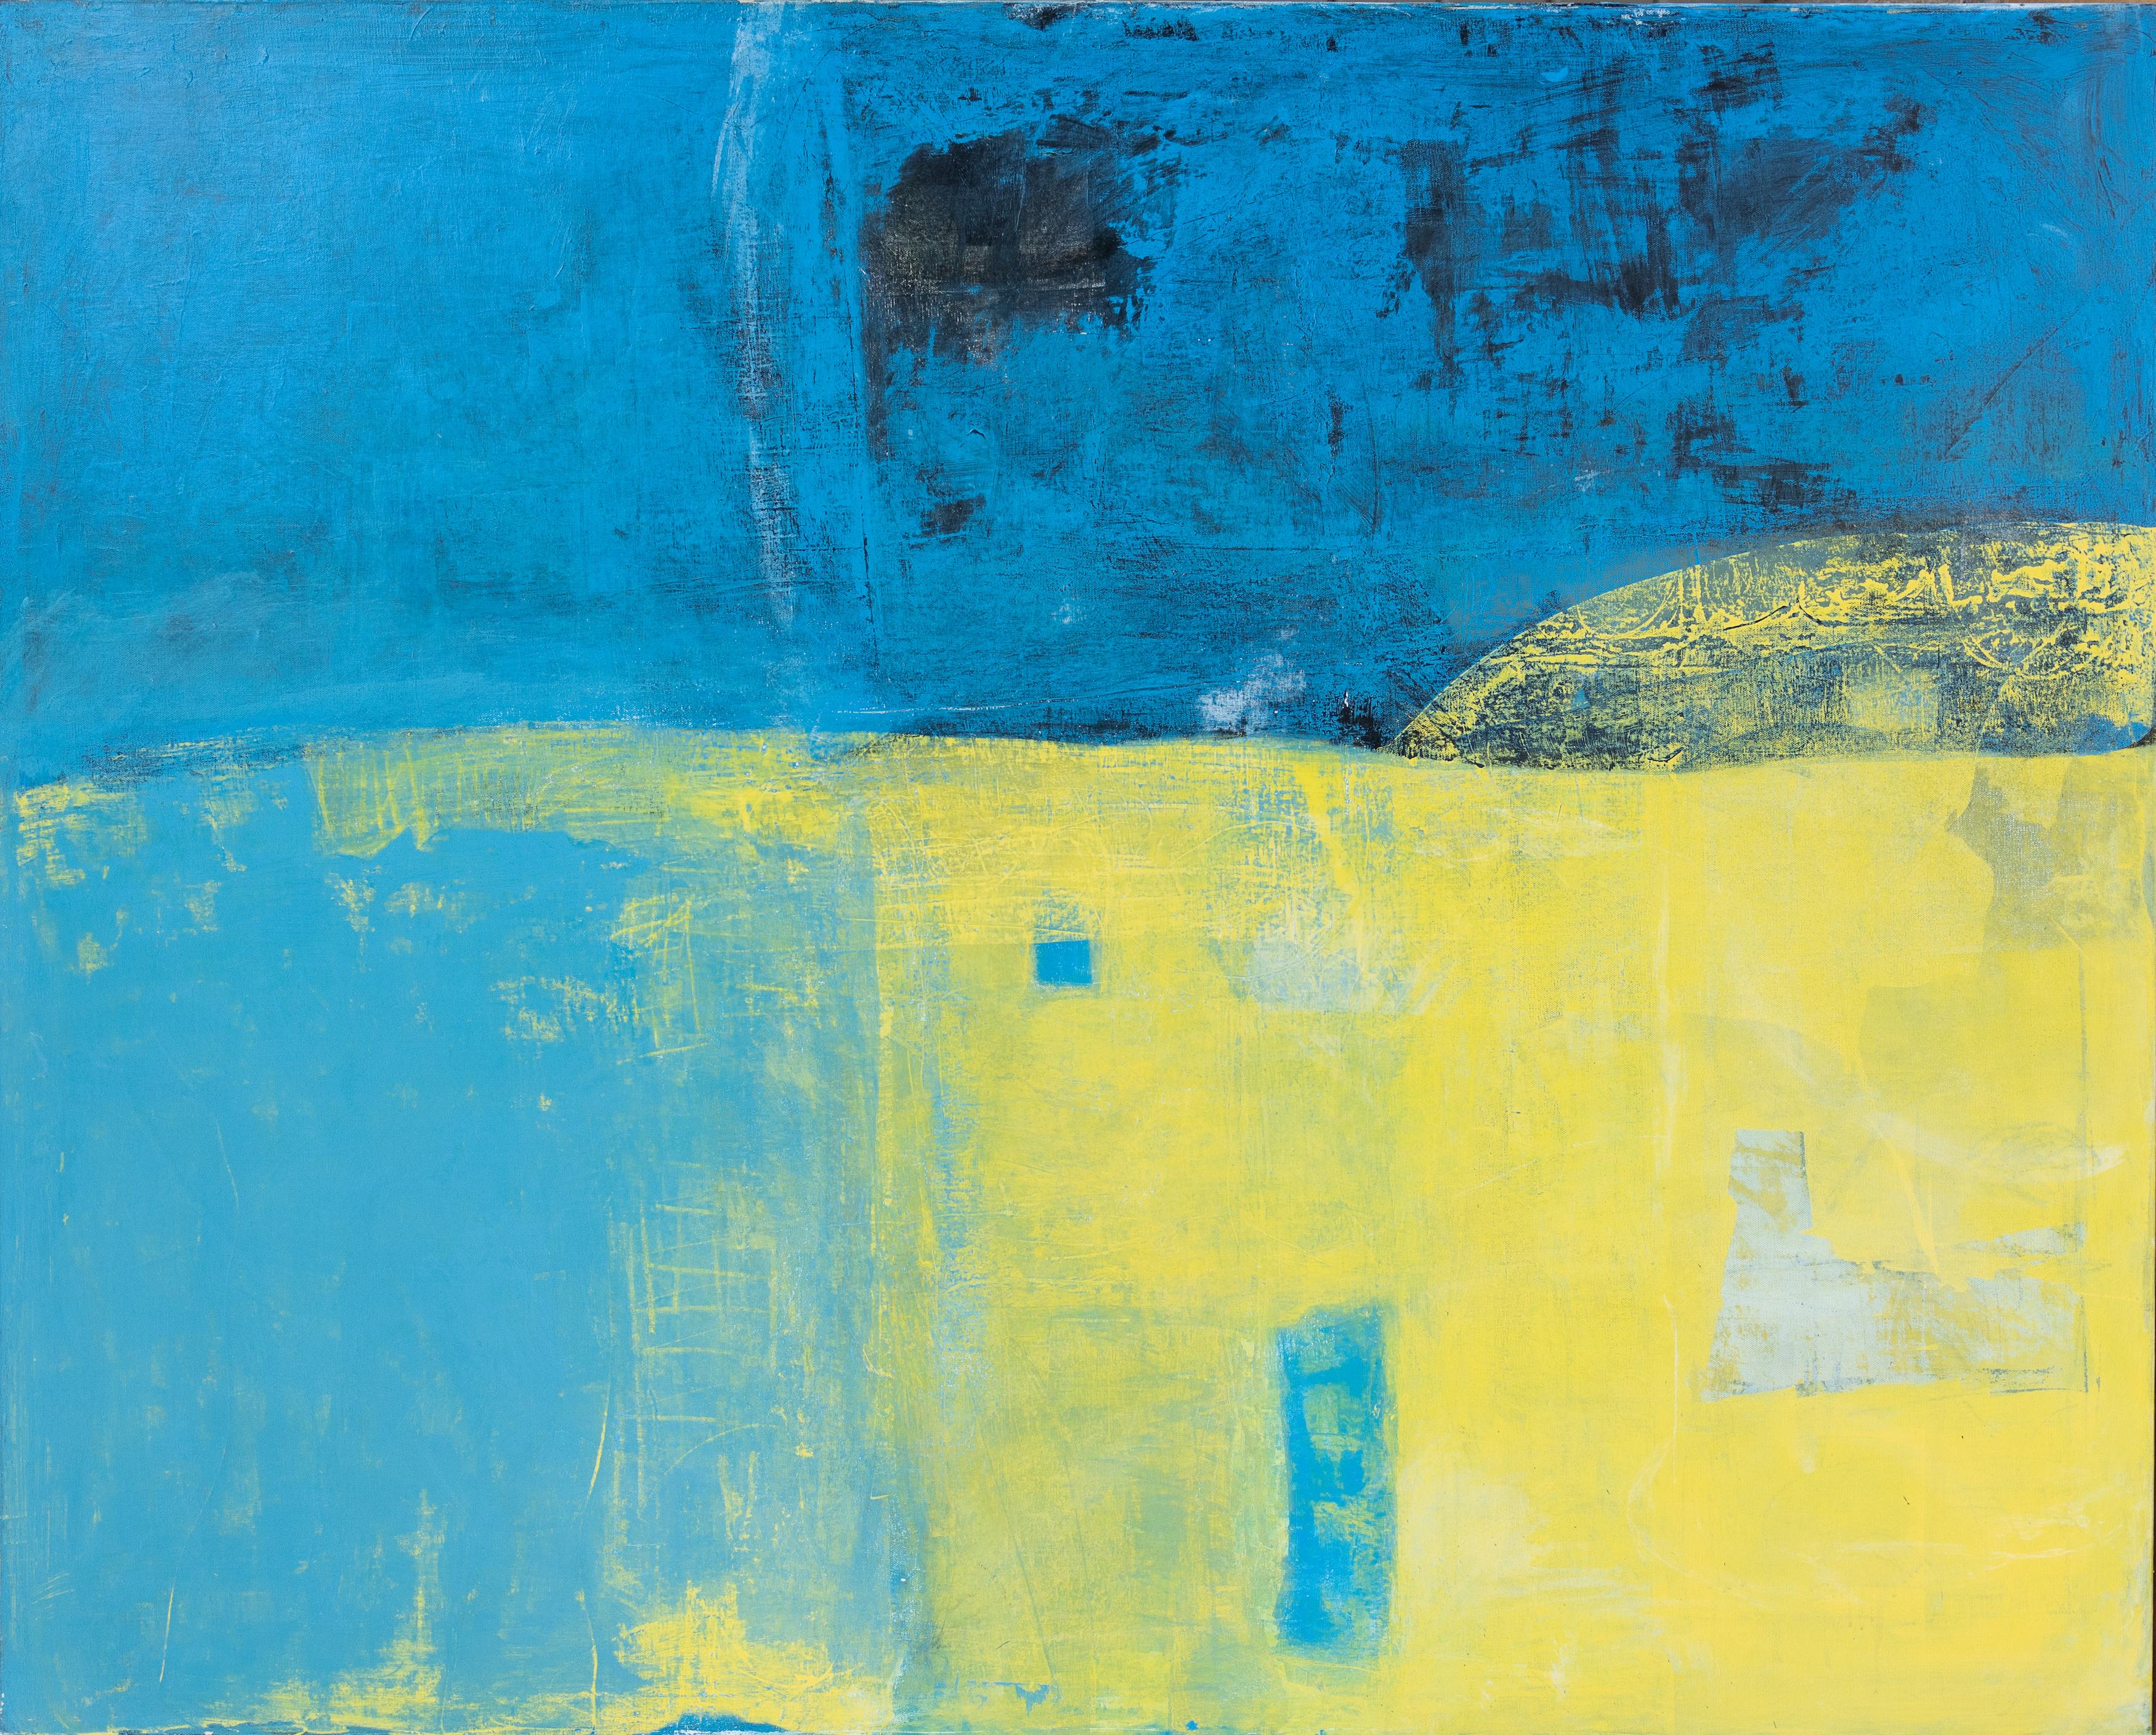 Blue and Yellow abstract by Tom Reno
60